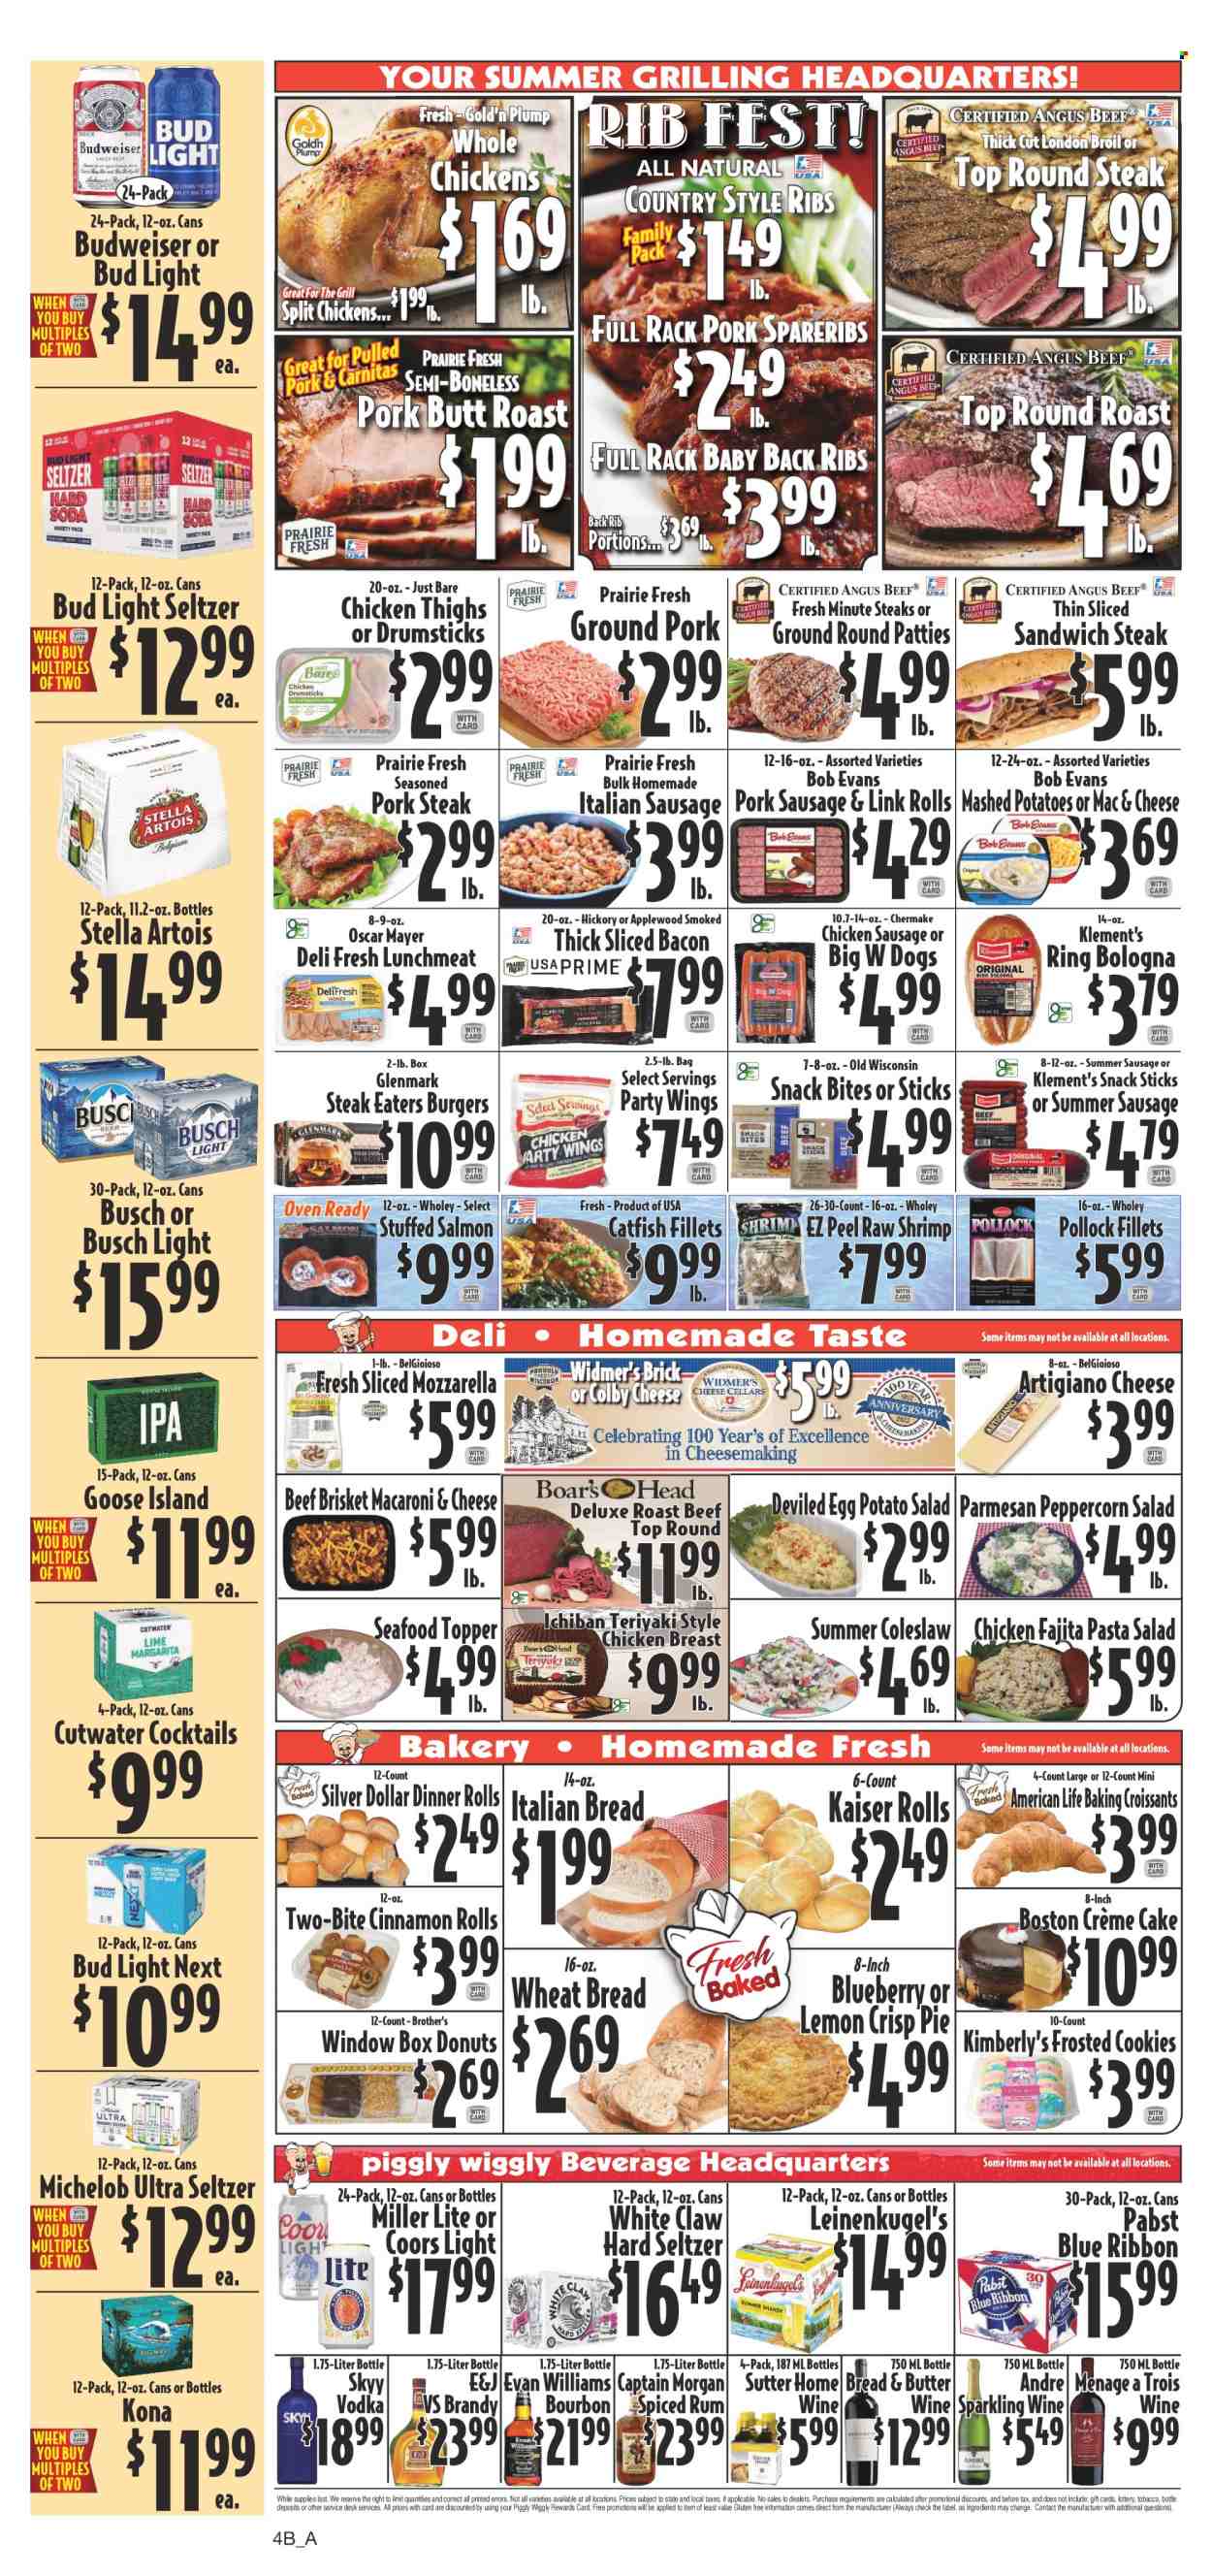 Piggly Wiggly ad  - 06.22.2022 - 06.28.2022.